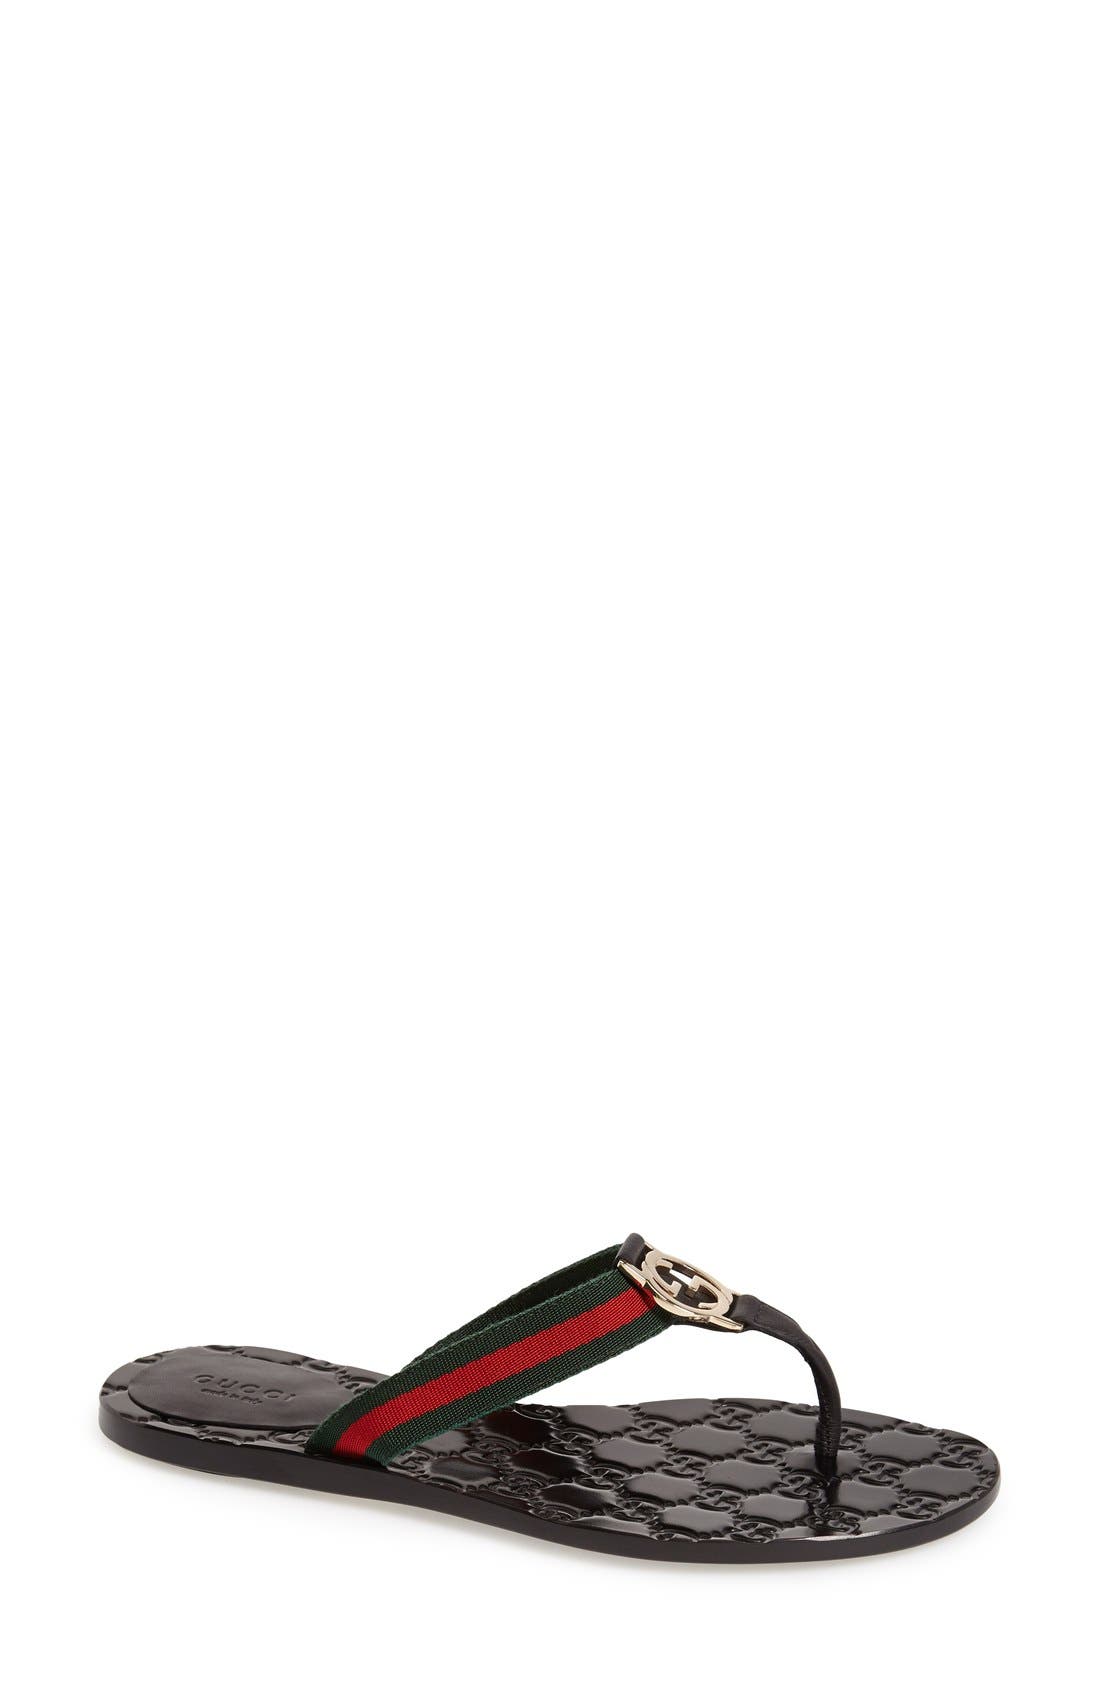 gucci gg thong sandals sale